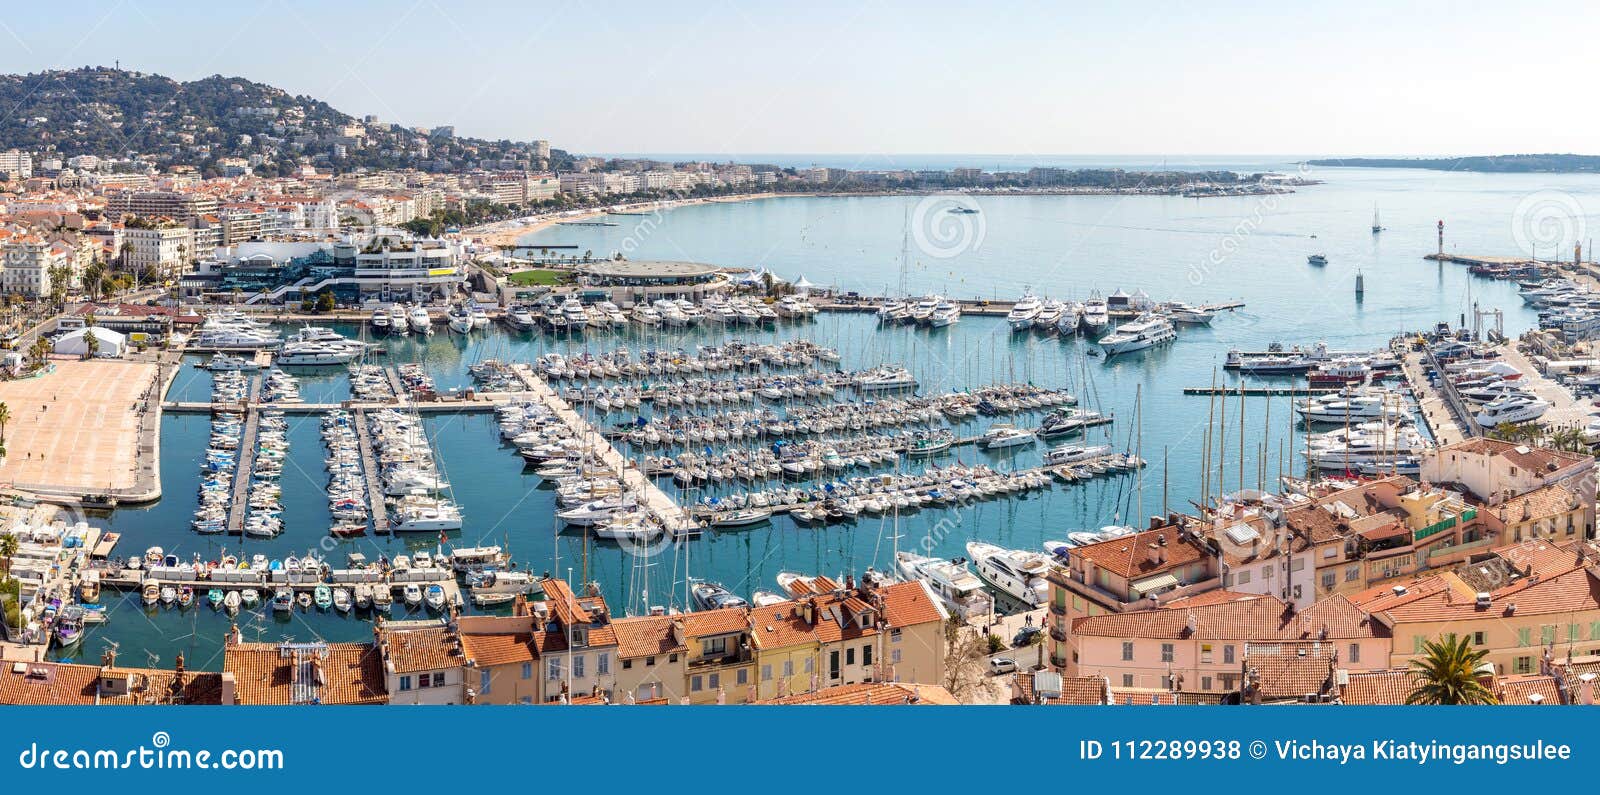 aerial view of cannes france